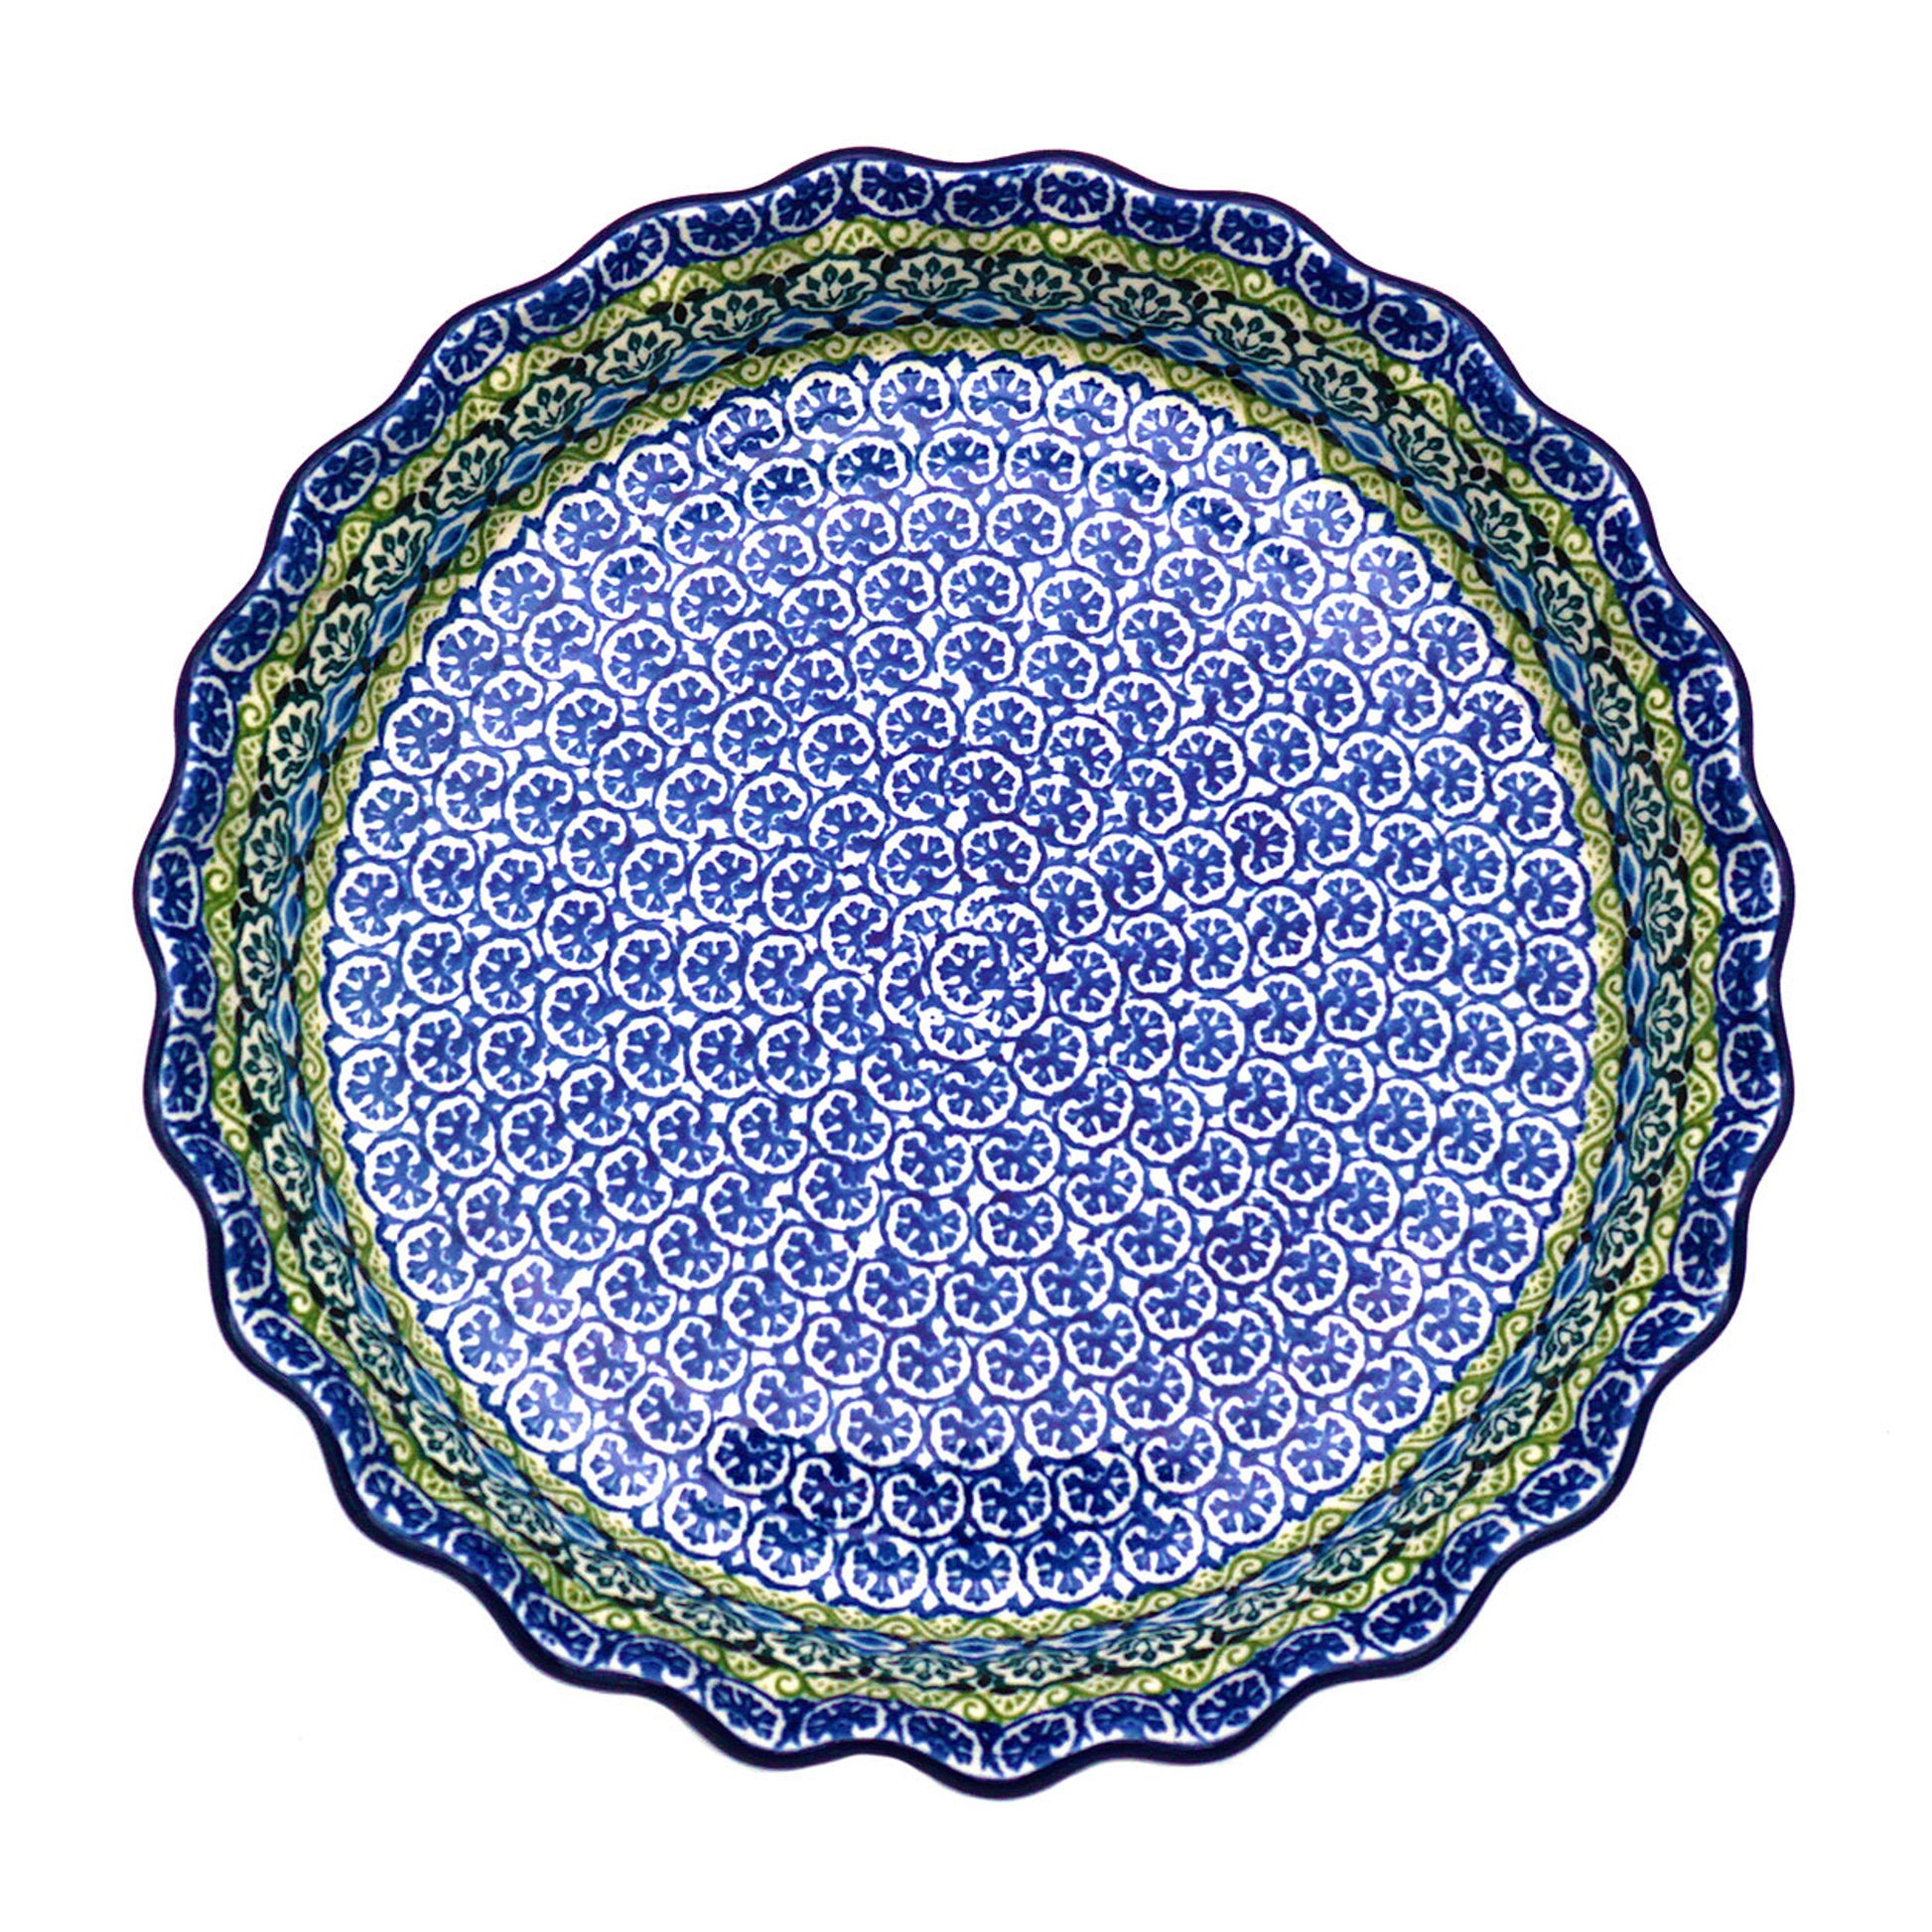 Polish Pottery Ruffled Pie Plate - More designs available